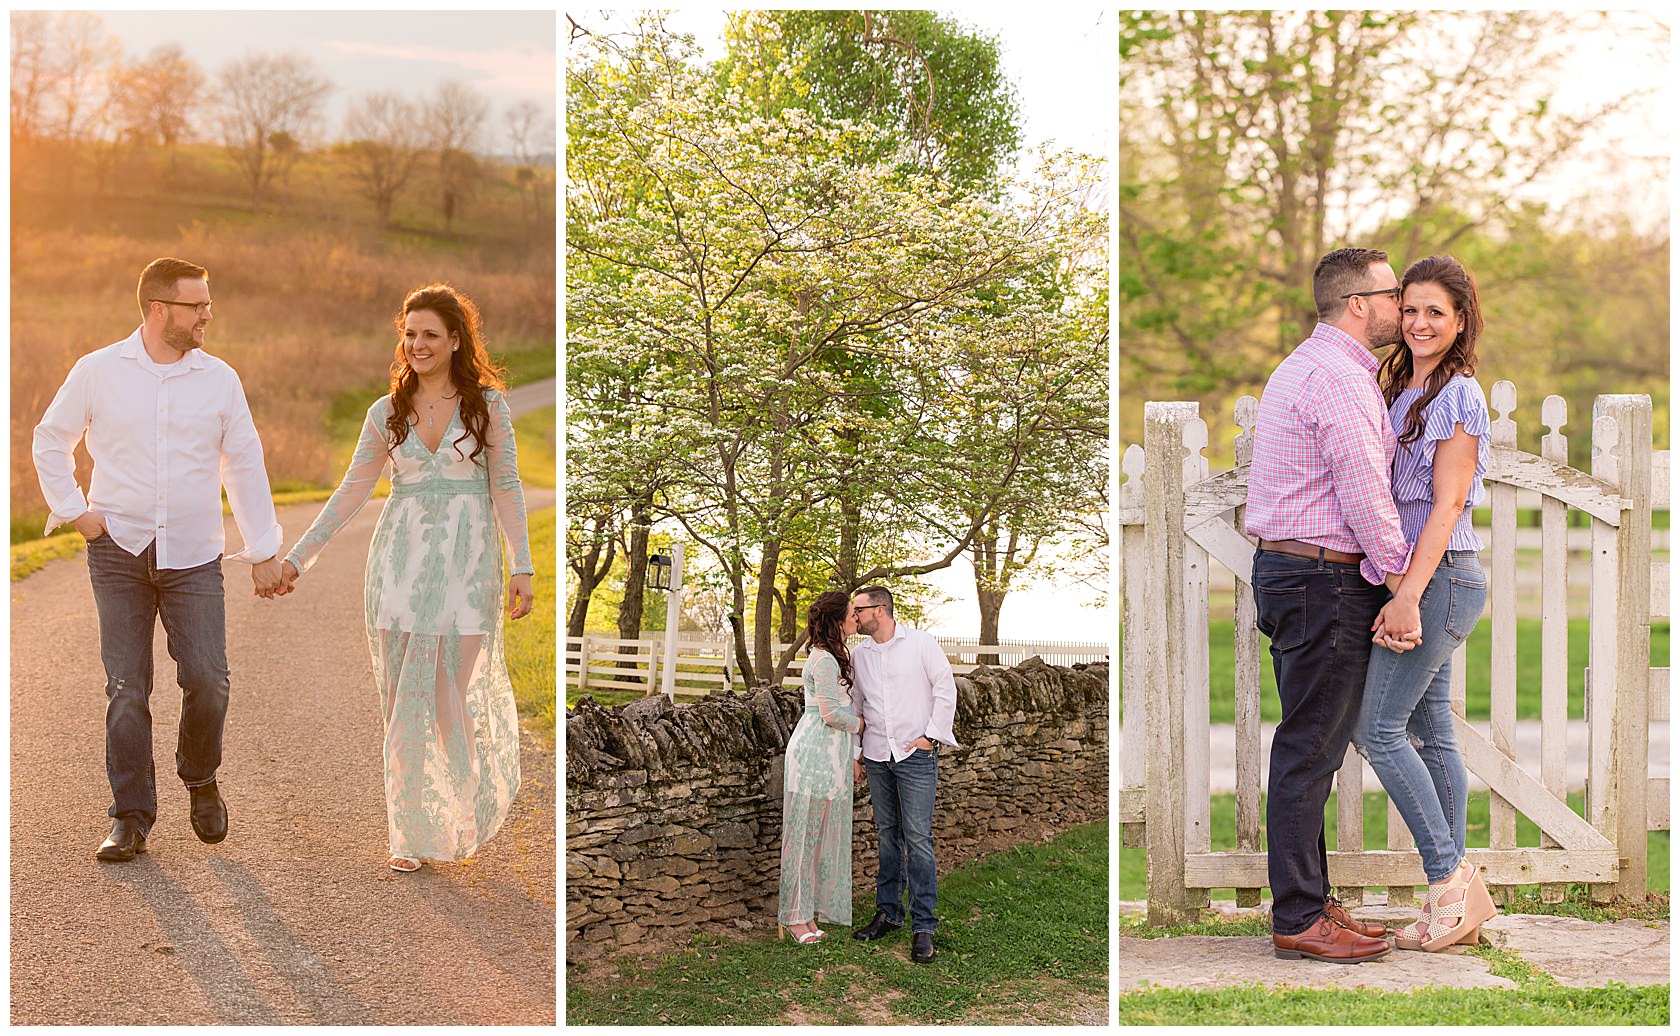 Lexington Kentucky Wedding Photographer at a Spring Engagement Session at Shaker Village